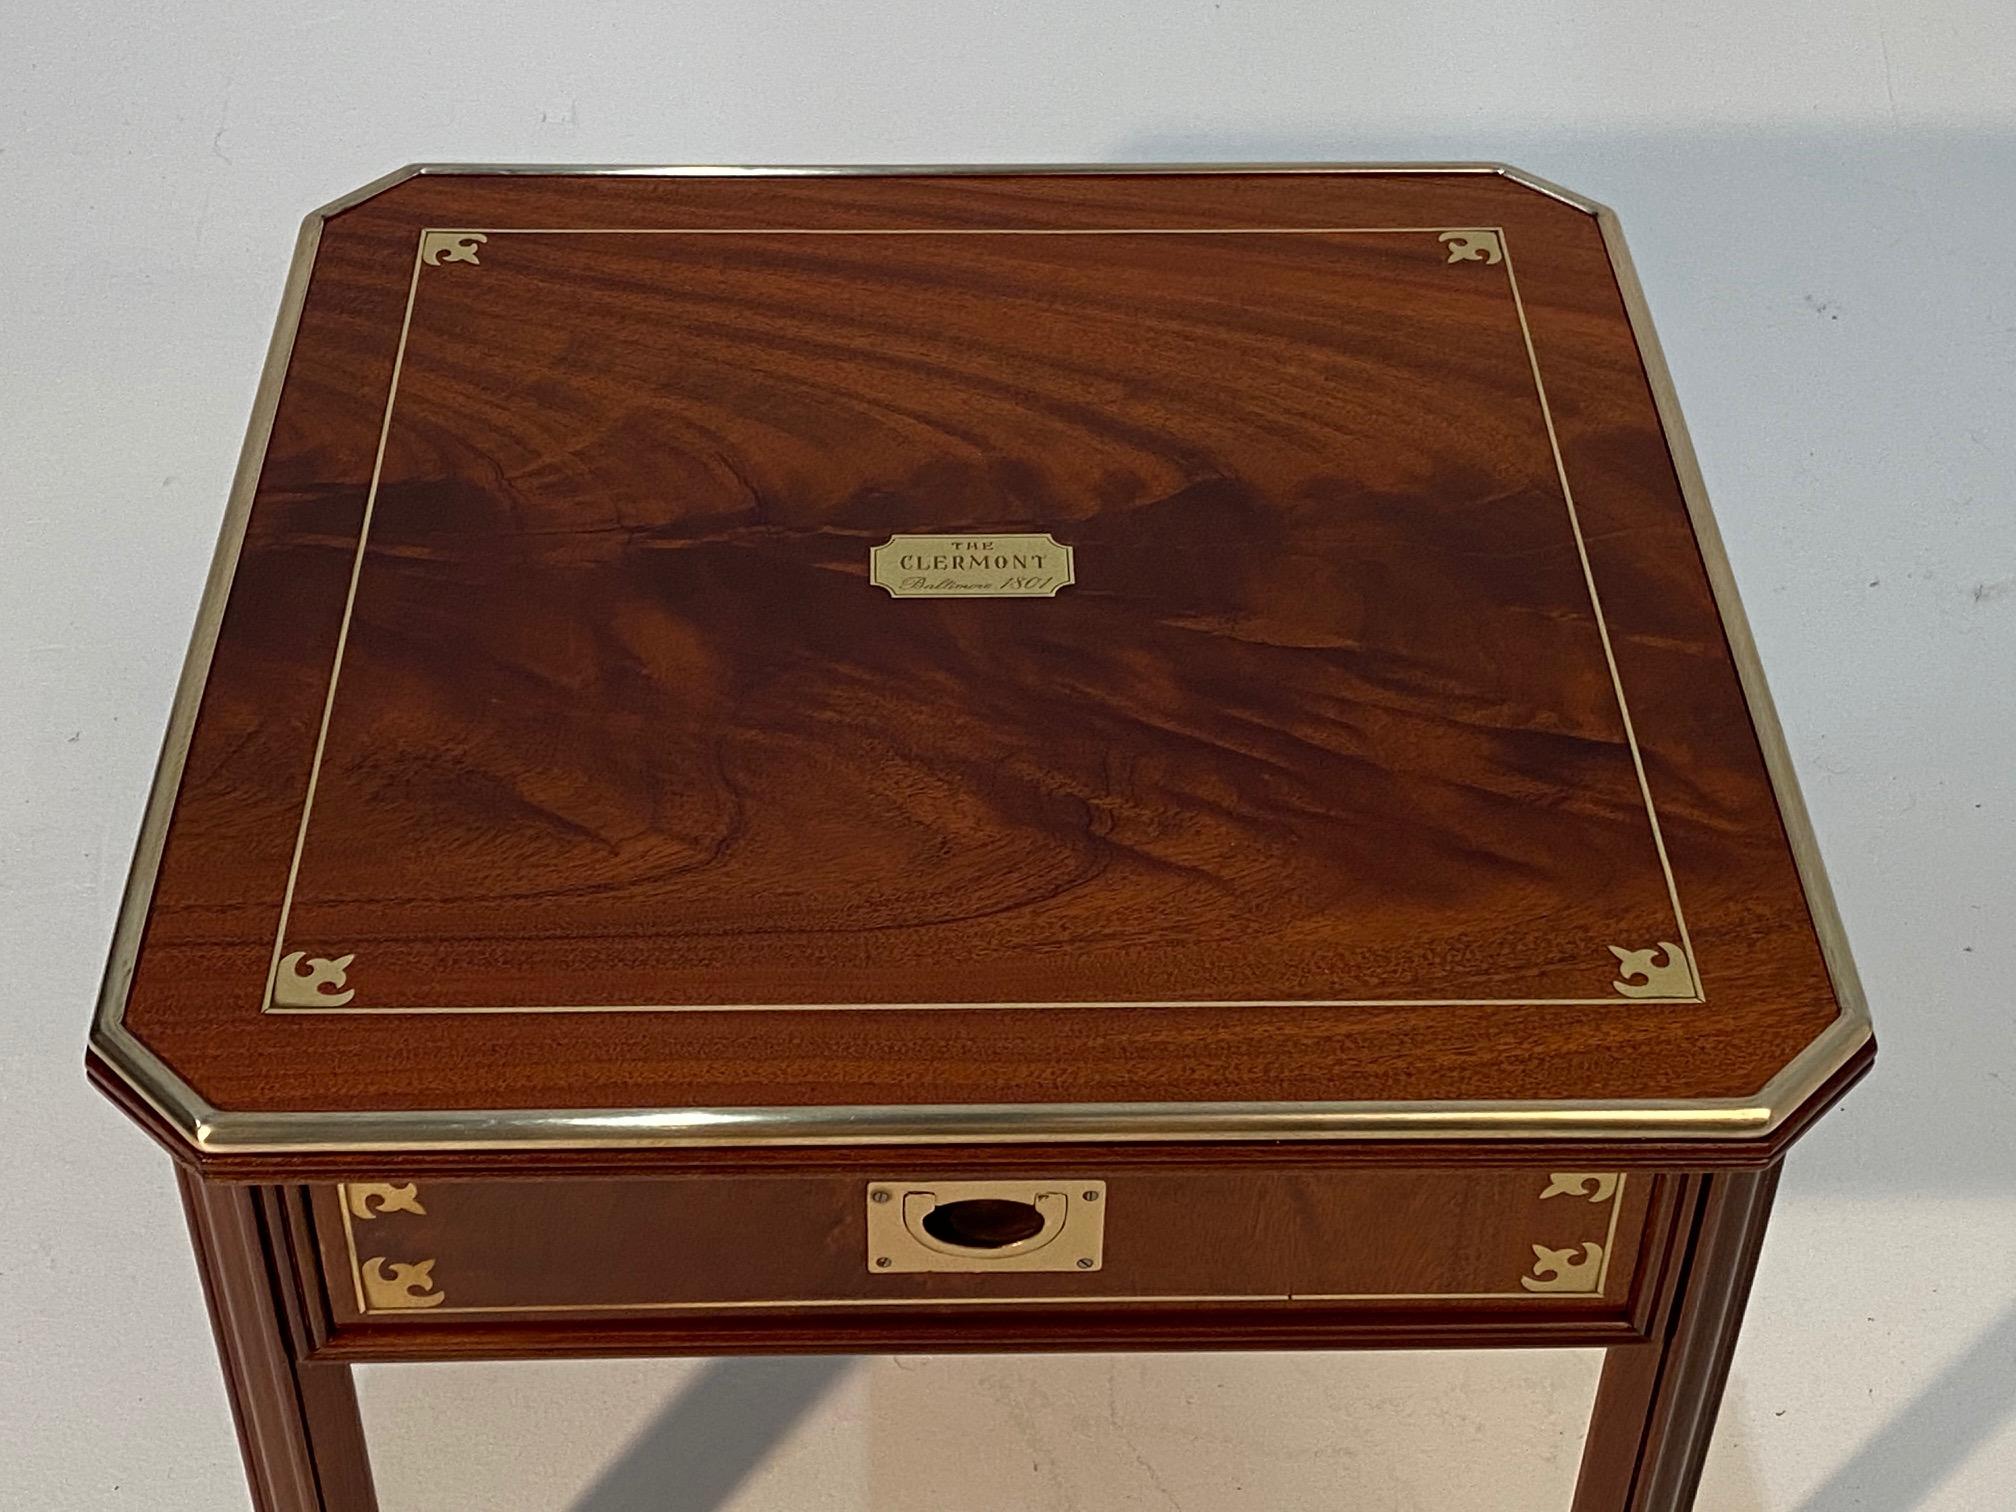 Handsome square mahogany Campaign style end or side table having brass inlay, molding as well as dovetailing. Beautiful craftsmanship and interesting provenance. Made for the Clermont Hotel in Baltimore est. 1801.